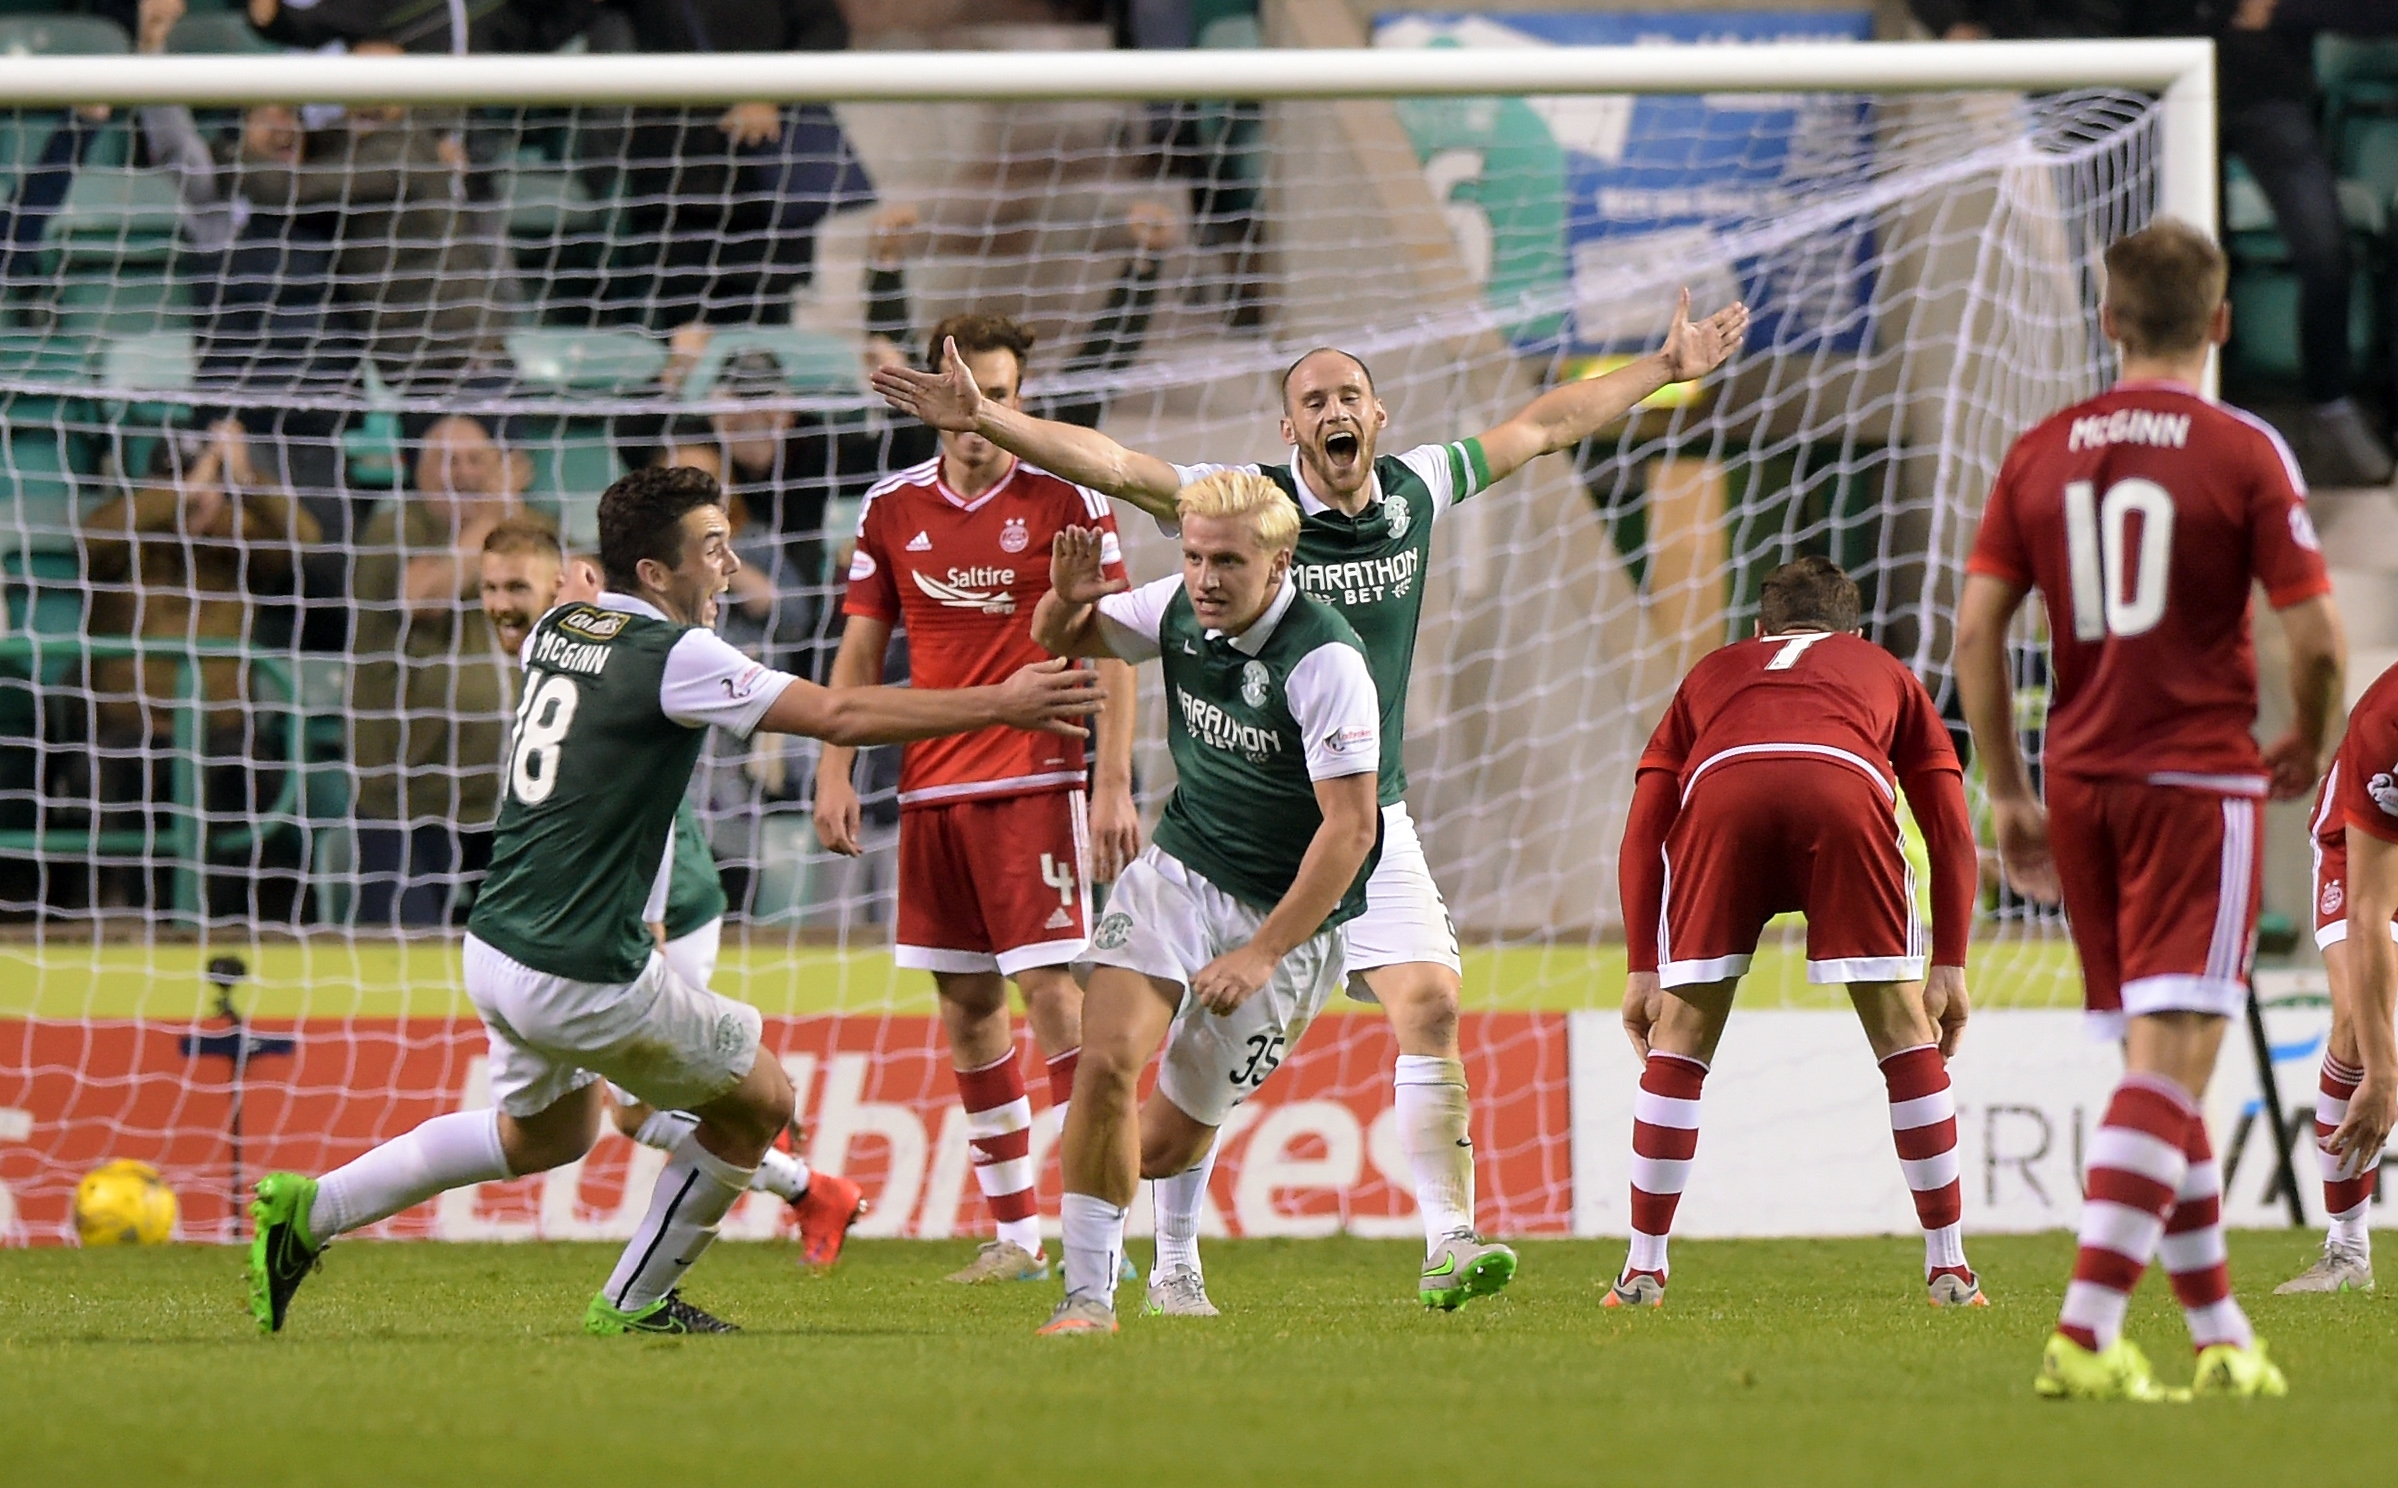 Aberdeen fell to defeat against Hibs on Wednesday